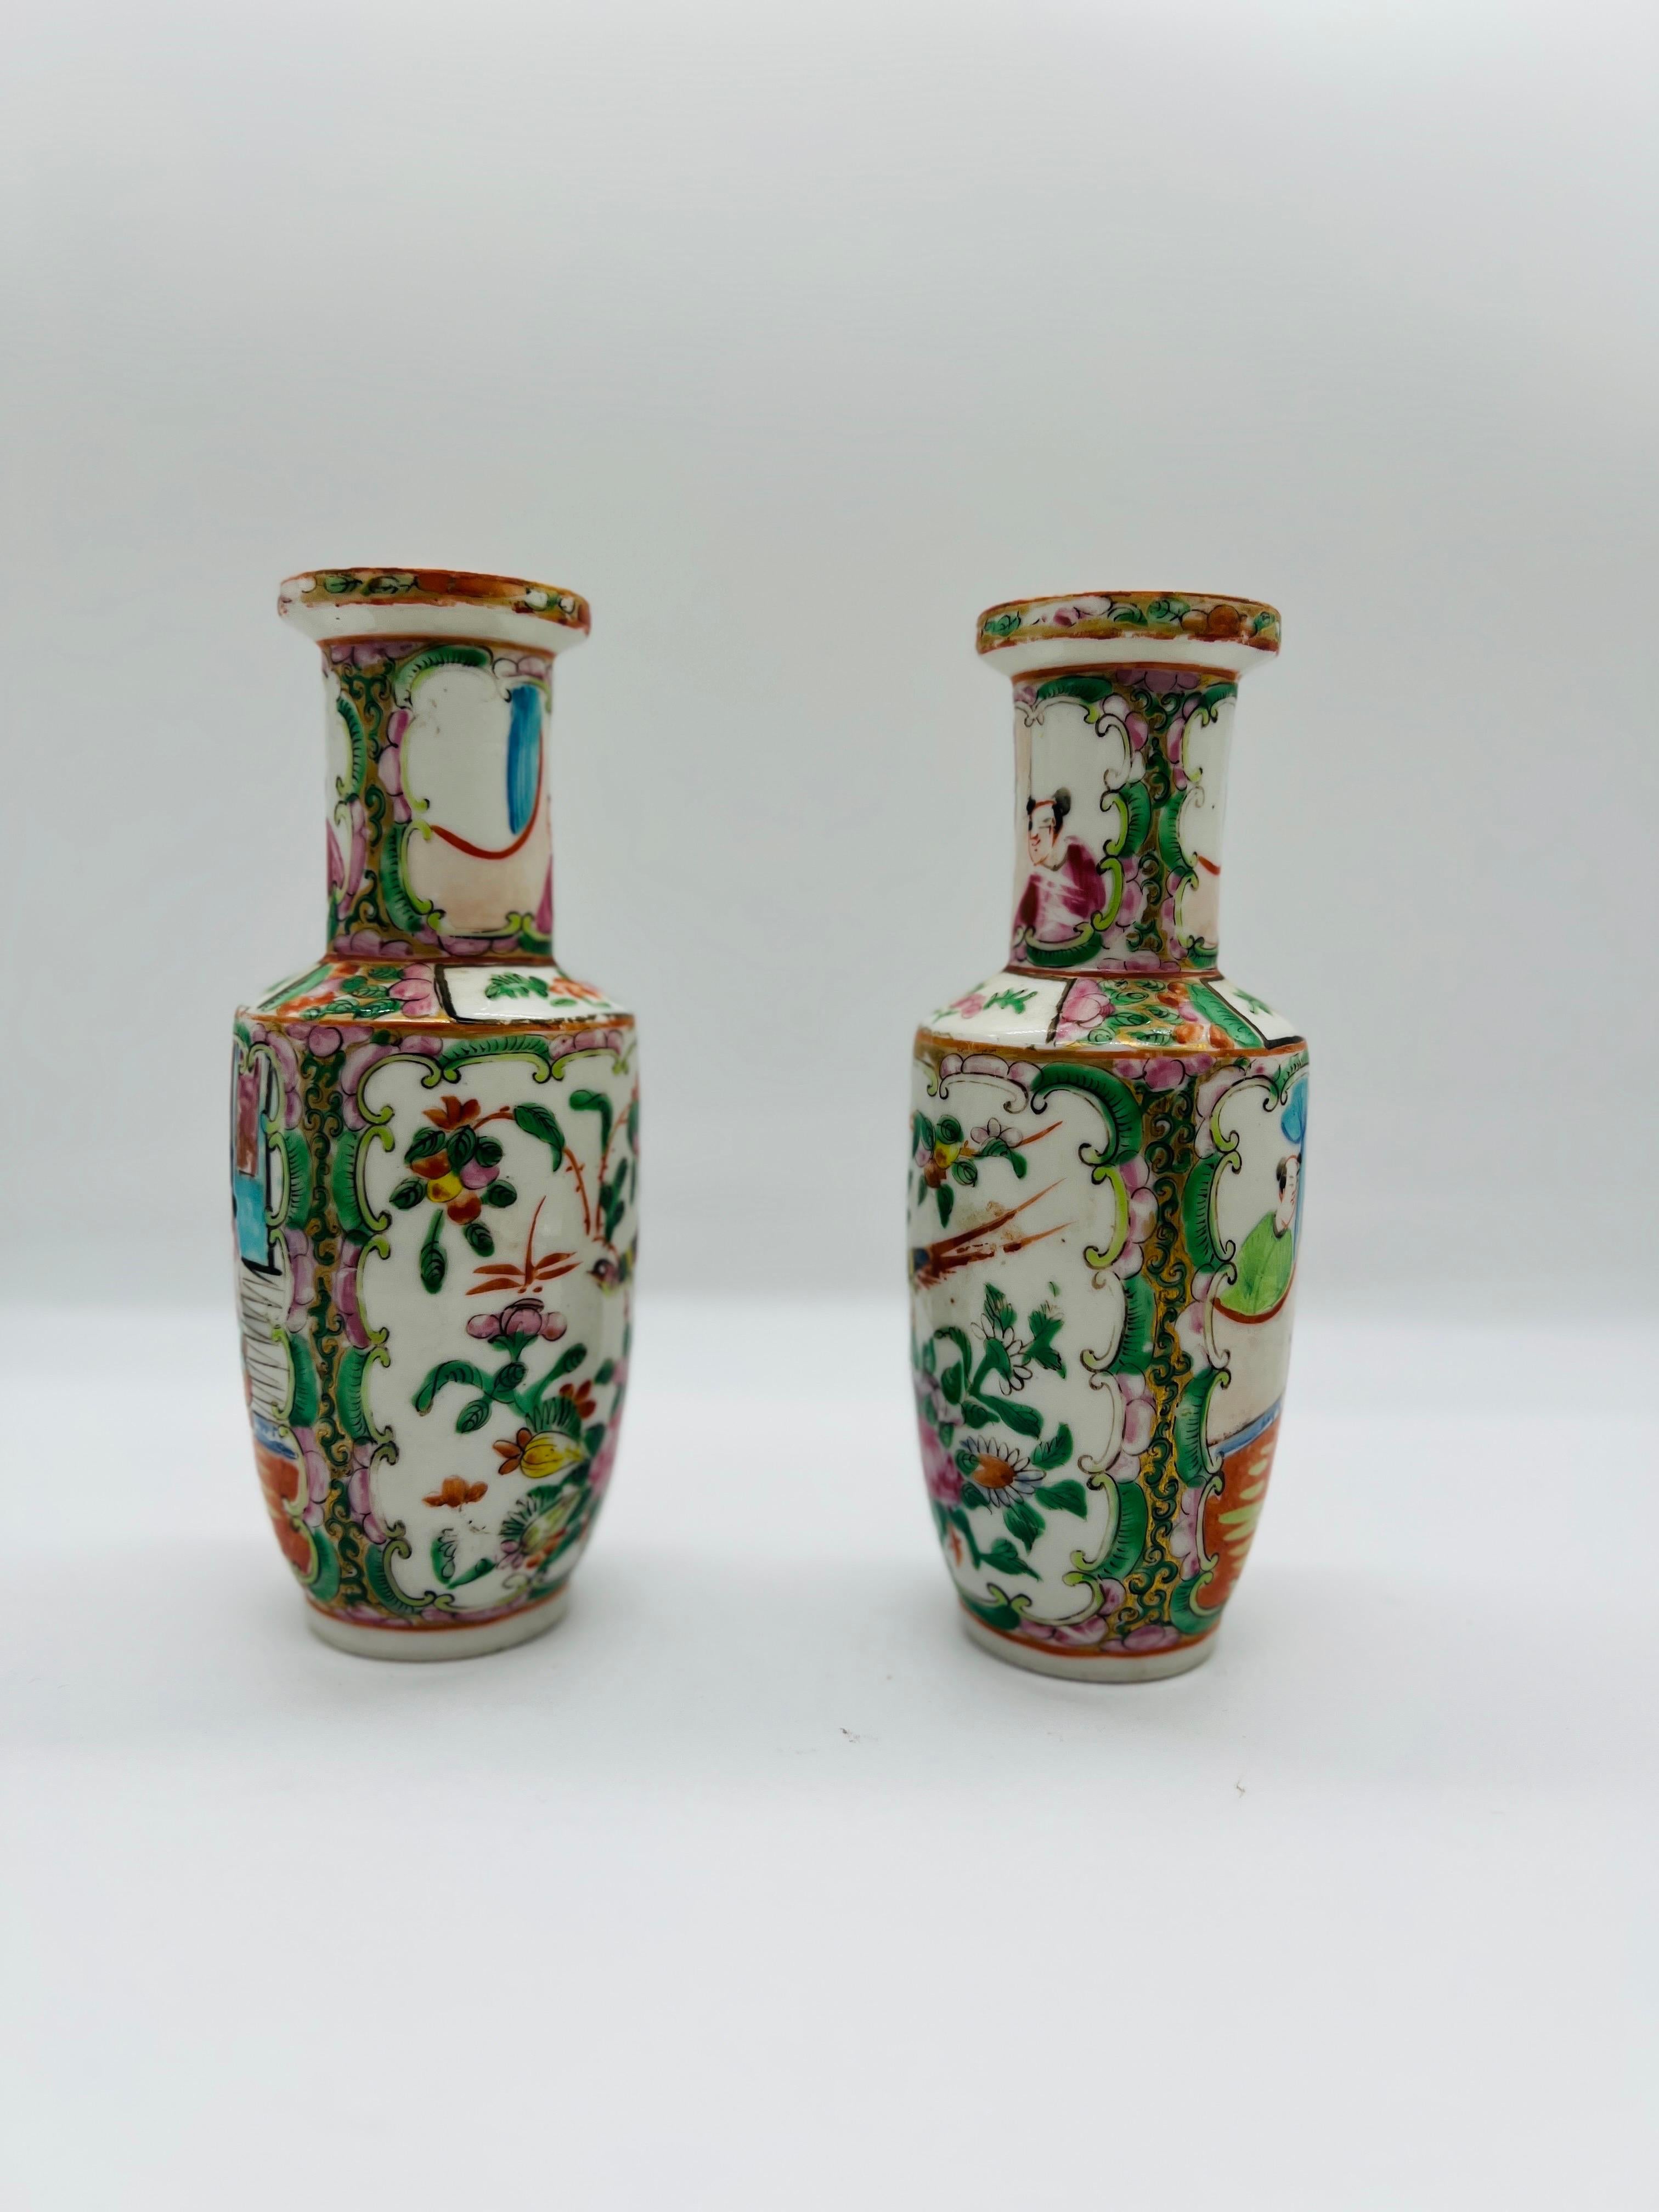 Chinese, 19th century.

A pair of antique 19th century Chinese vases decorated in the Famille Rose medallion pattern. Each vase has floral and bird motifs to one side and traditional guardian landscapes to the other. Unmarked to underside.